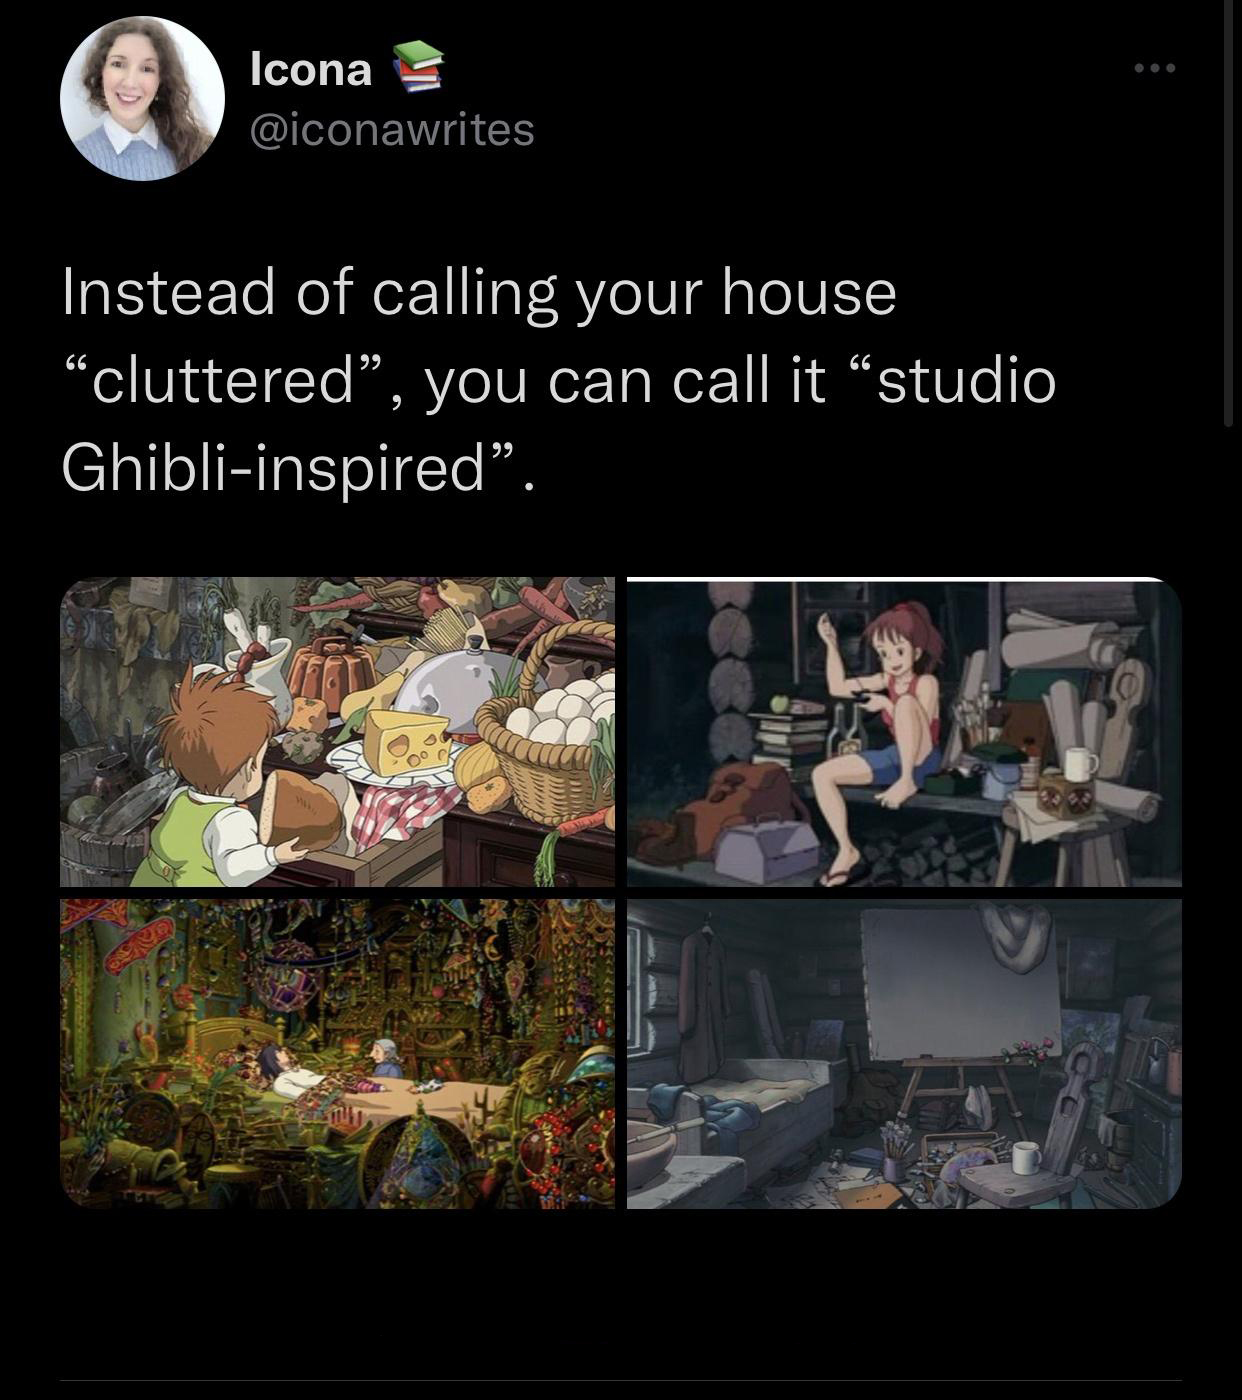 funny tweets - Studio Ghibli - Icona Instead of calling your house "cluttered", you can call it "studio Ghibliinspired".